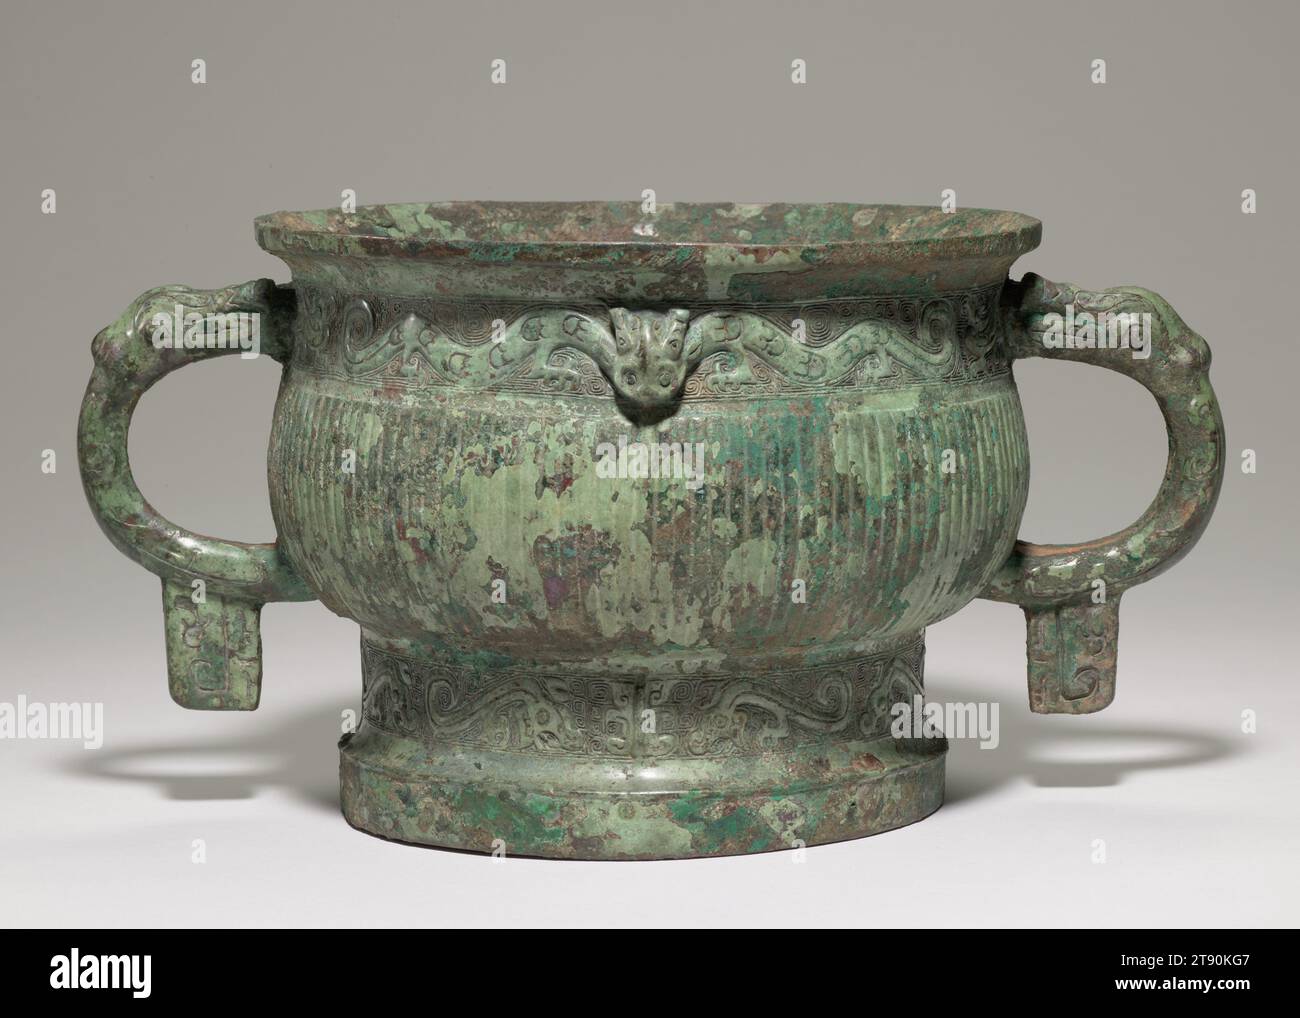 Gui (ritual food vessel), 11th-10th century BCE, 6 1/4 × 12 5/16 × 724 in. (15.88 × 31.27 × 1838.96 cm), Bronze, China, 11th-10 century BCE, This vessel form, known as gui, was used to hold food in ritual ceremonies during the Bronze Age. The band under the lip is a pair of bifurcated dragons, whose rounded, undulant double body is patterned with intaglio tulip-shaped designs. In the frieze encircling the foot two pairs of S-shaped dragons, on each side of the body, are arranged around relief ridges coaxial with the horned dragon head in the upper border. Stock Photo